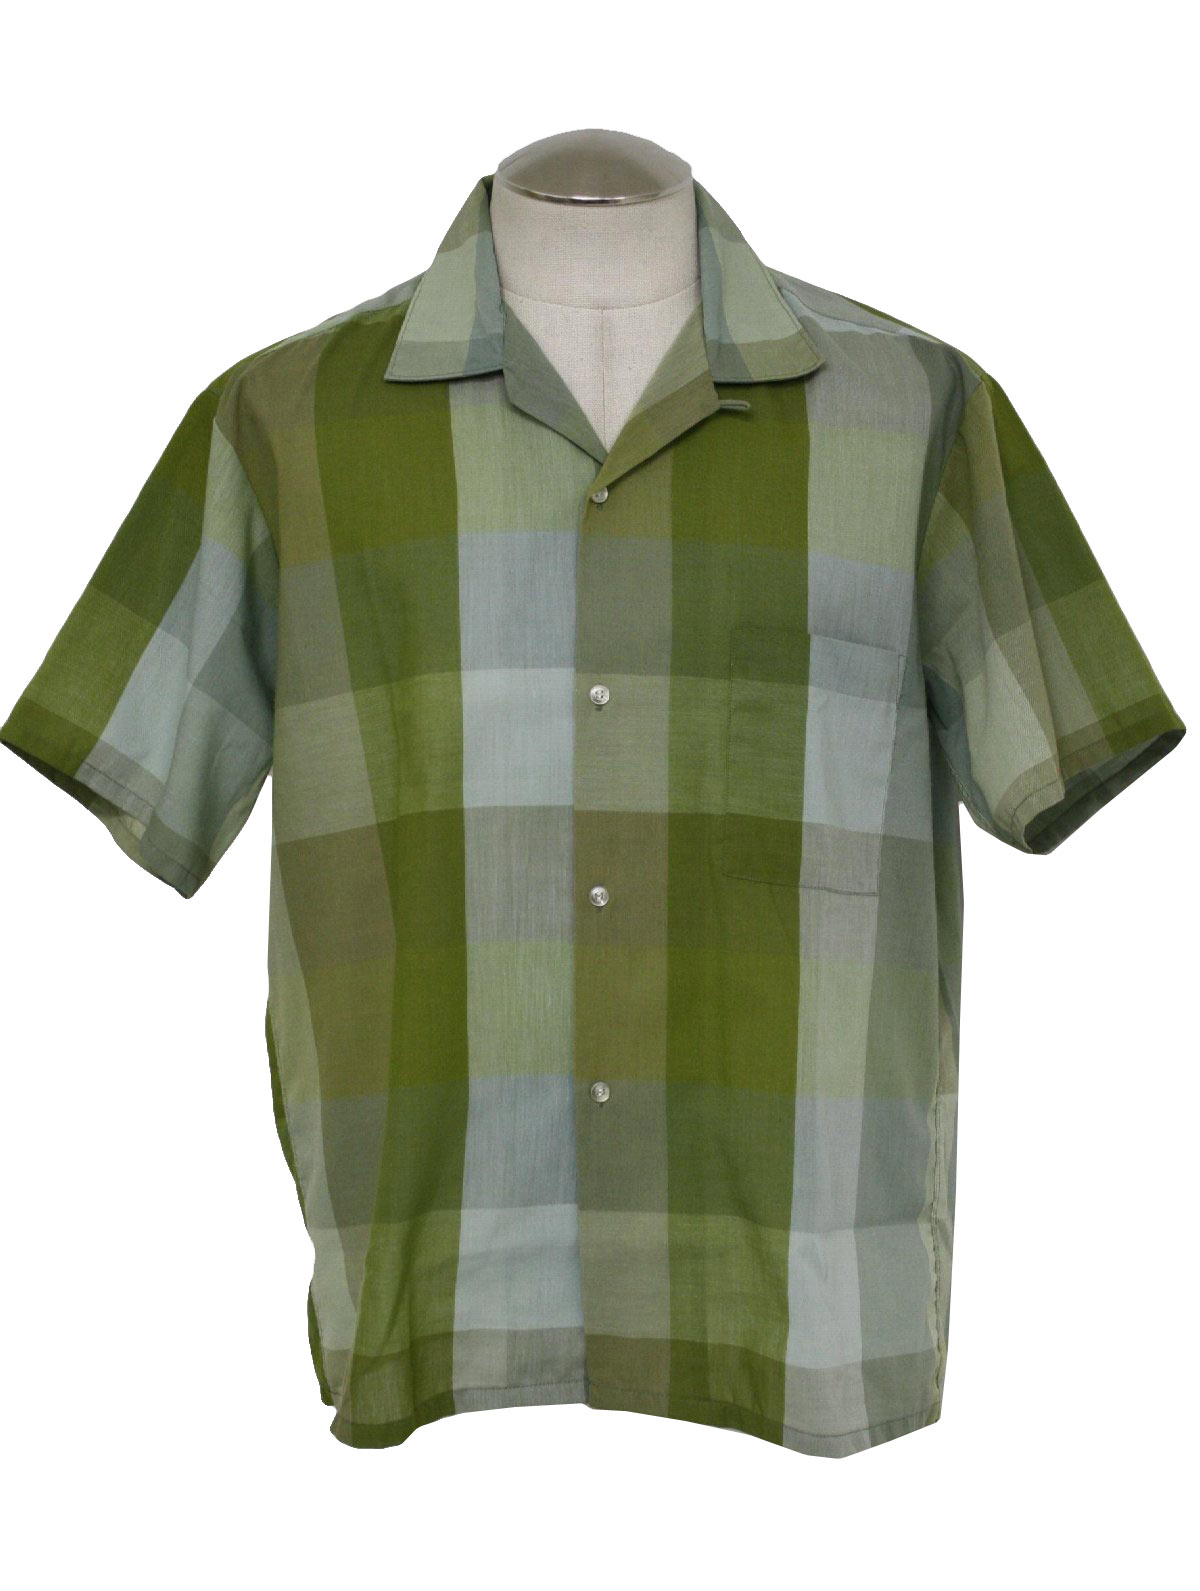 Vintage Sixties Shirt: 60s -No Label- Mens pale green, sea green, olive ...